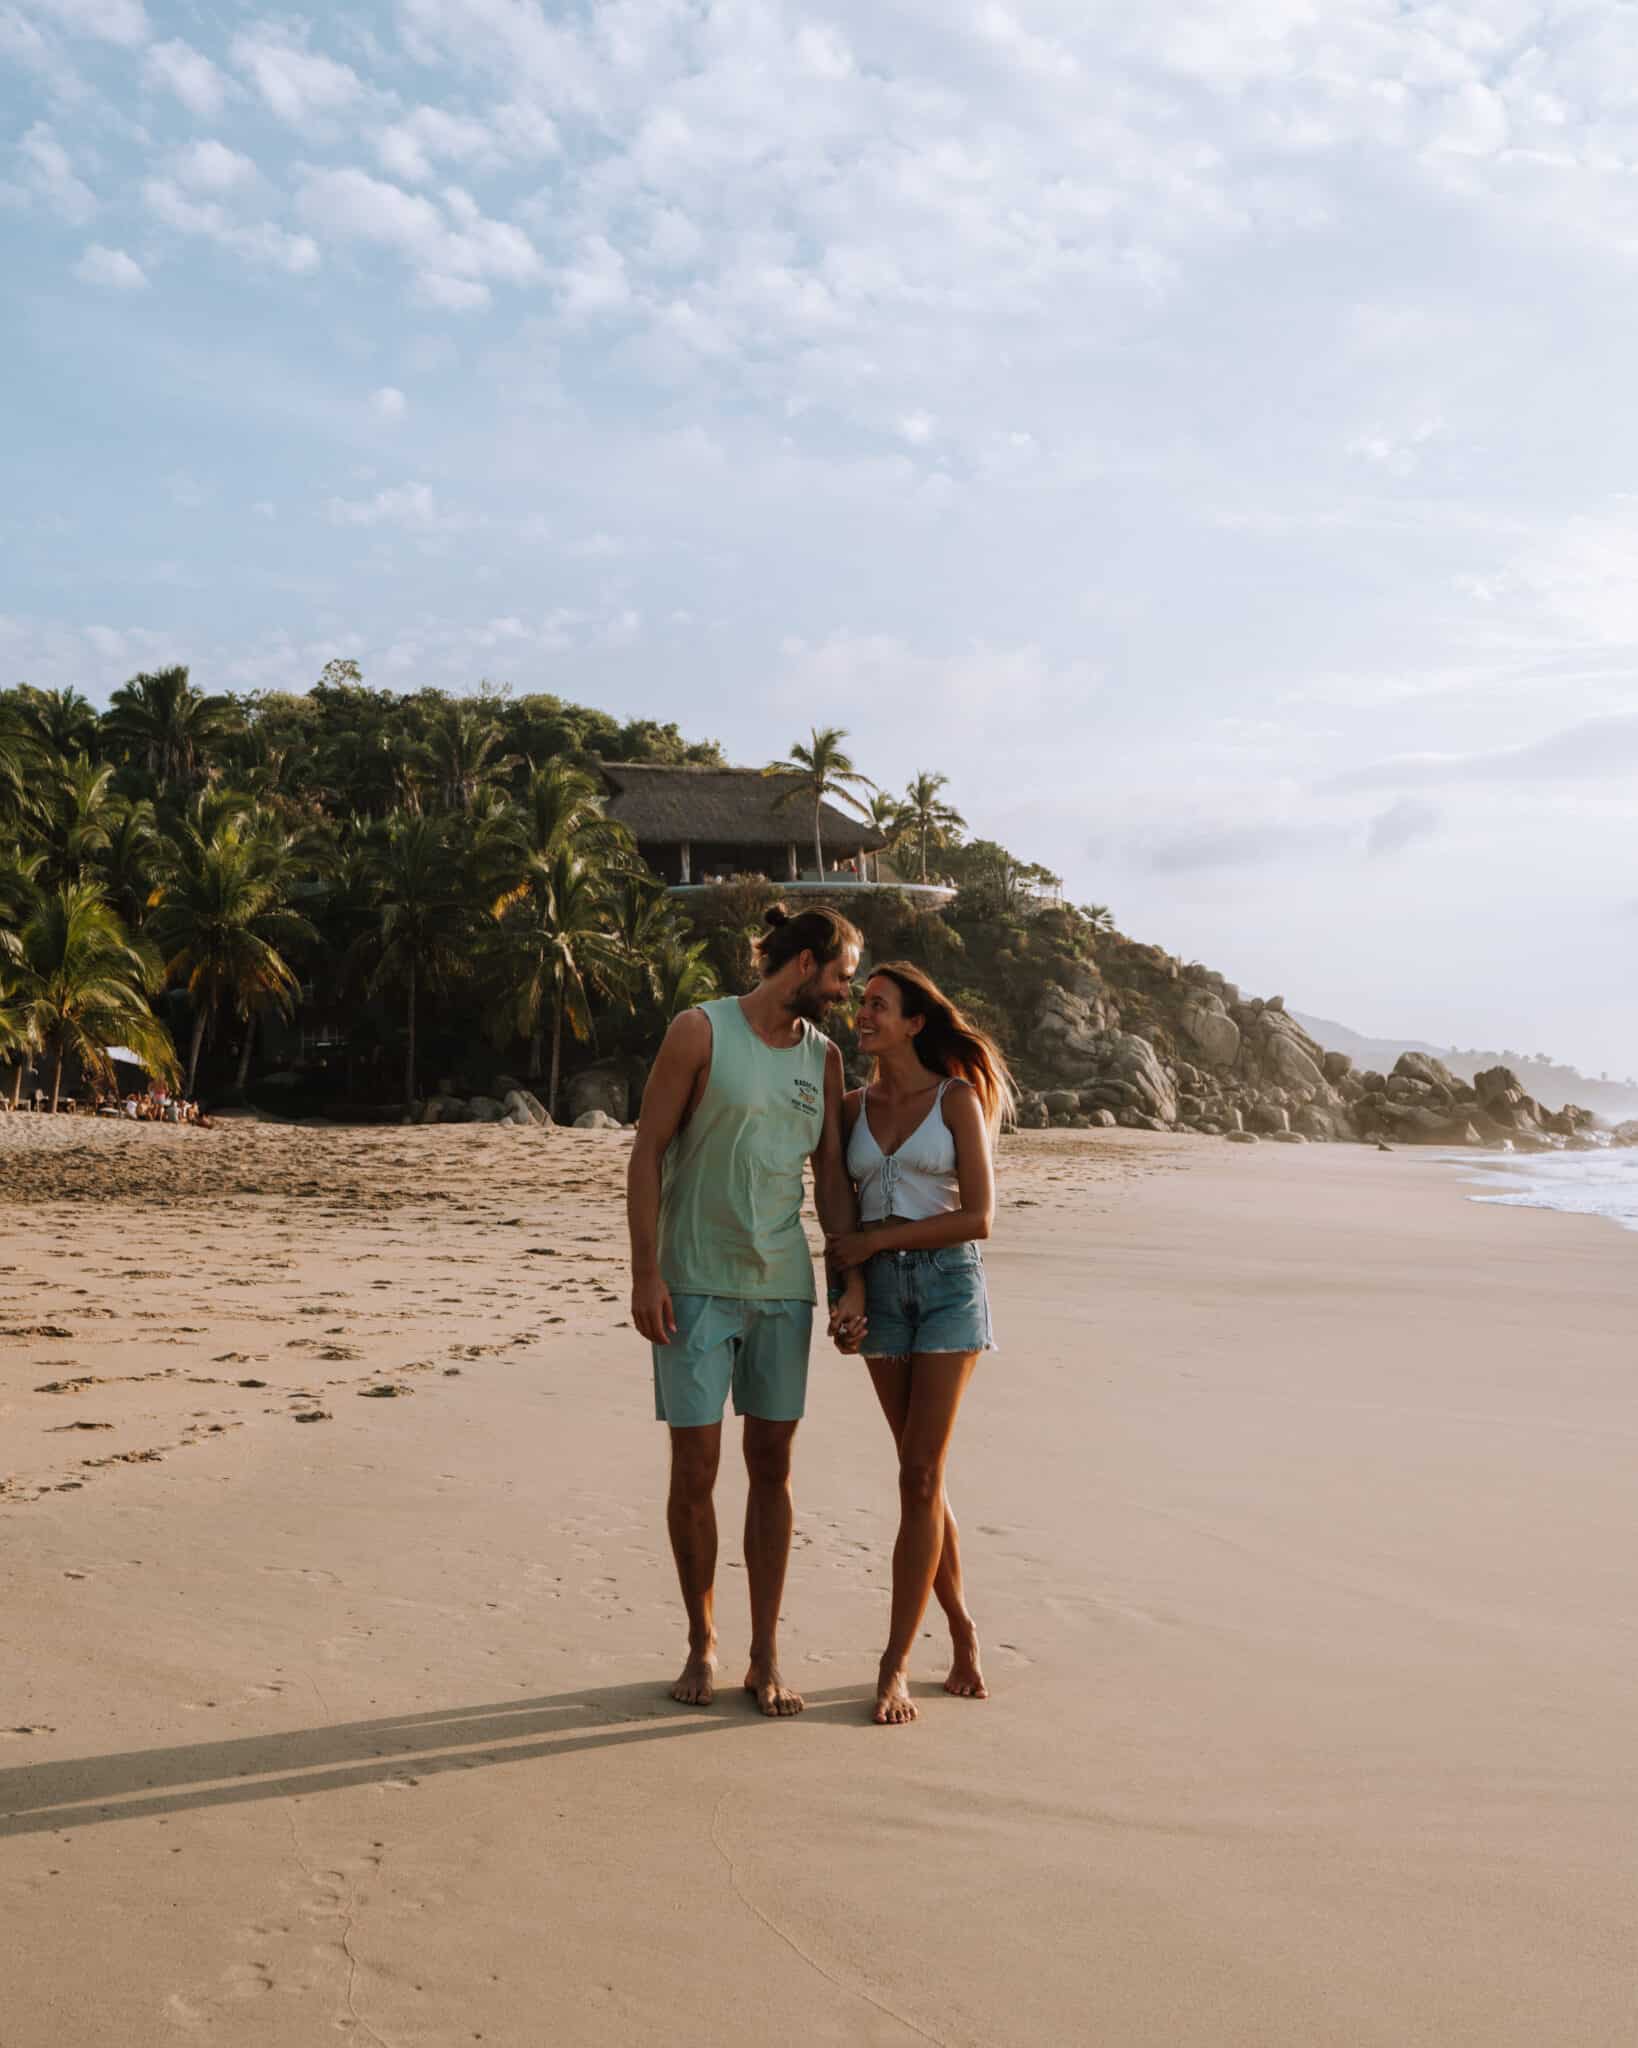 A couple standing on a Sayulita beach with palm trees in the background.